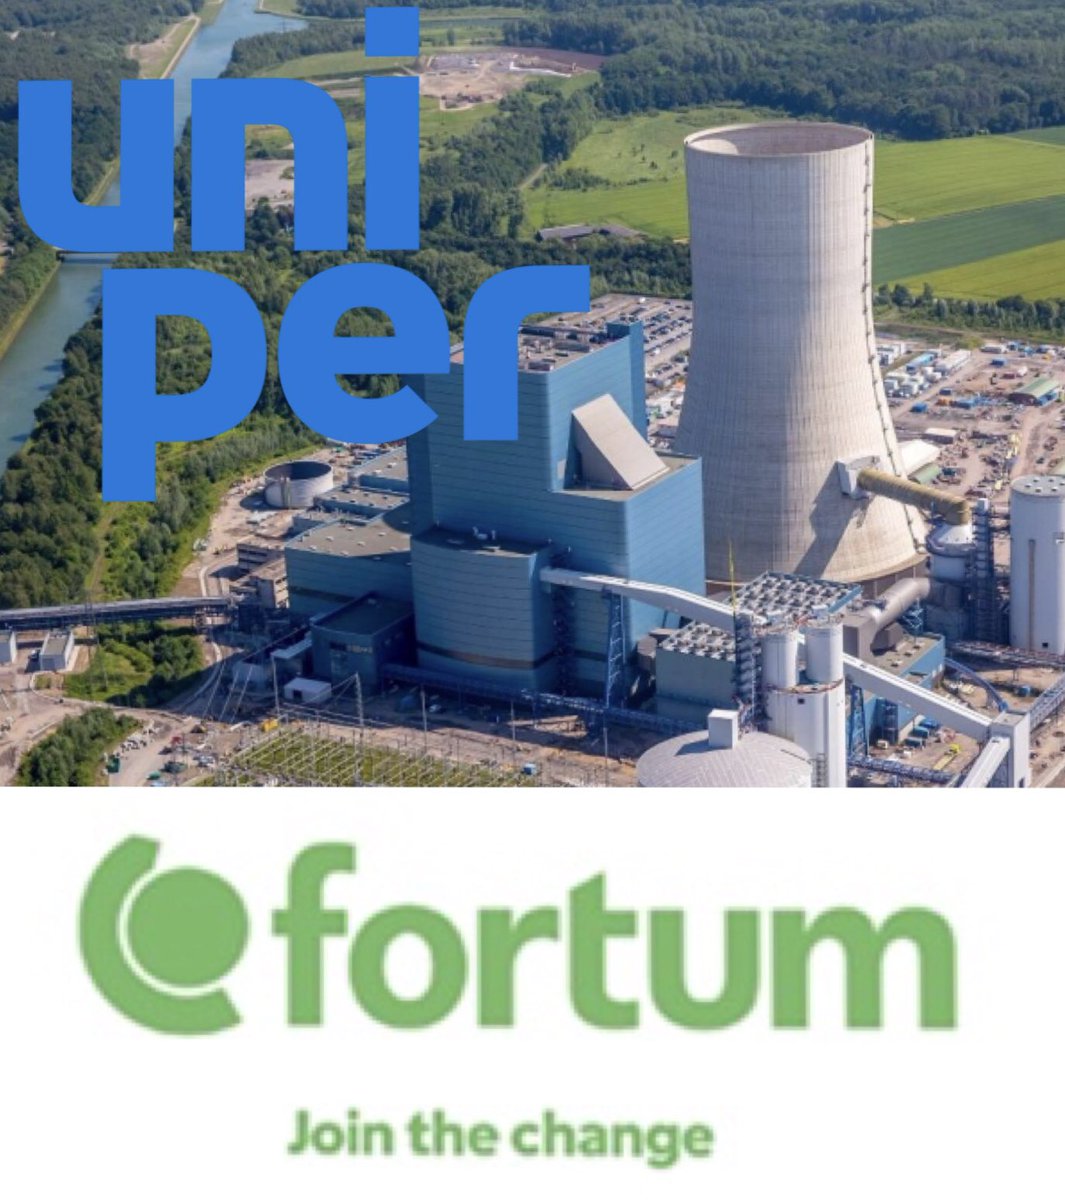 On Saturday  @uniper_energy and Finnish state owned  @Fortum will open a brand new coal power plant  #Datteln4 in Germany.Those in power clearly lied when they said they cared about their children’s future.If you needed proof that their words and promises were empty, this is it.